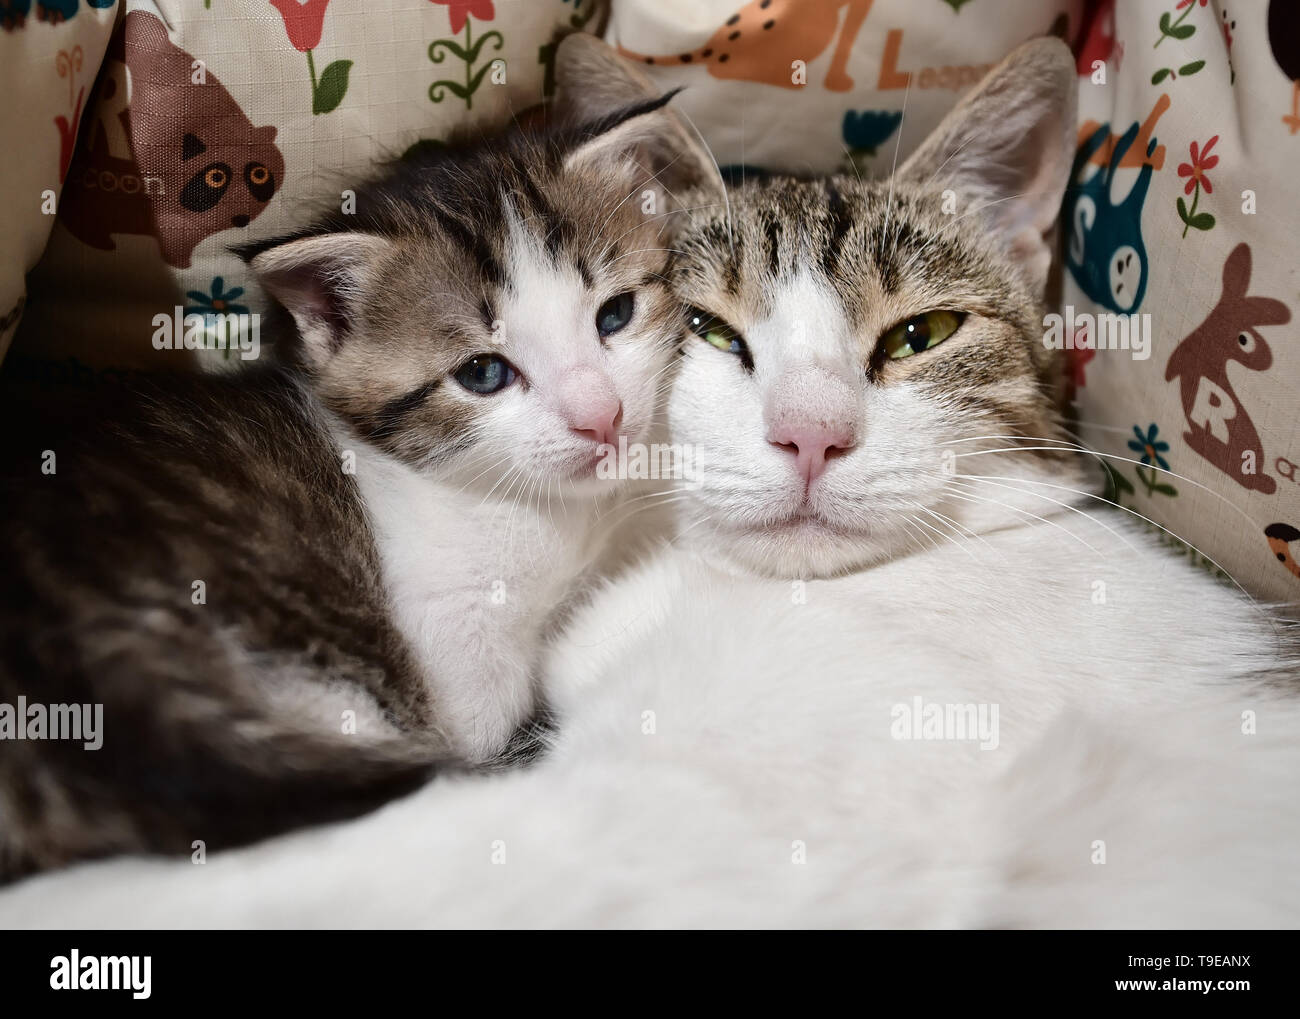 A cat with a kittens Stock Photo